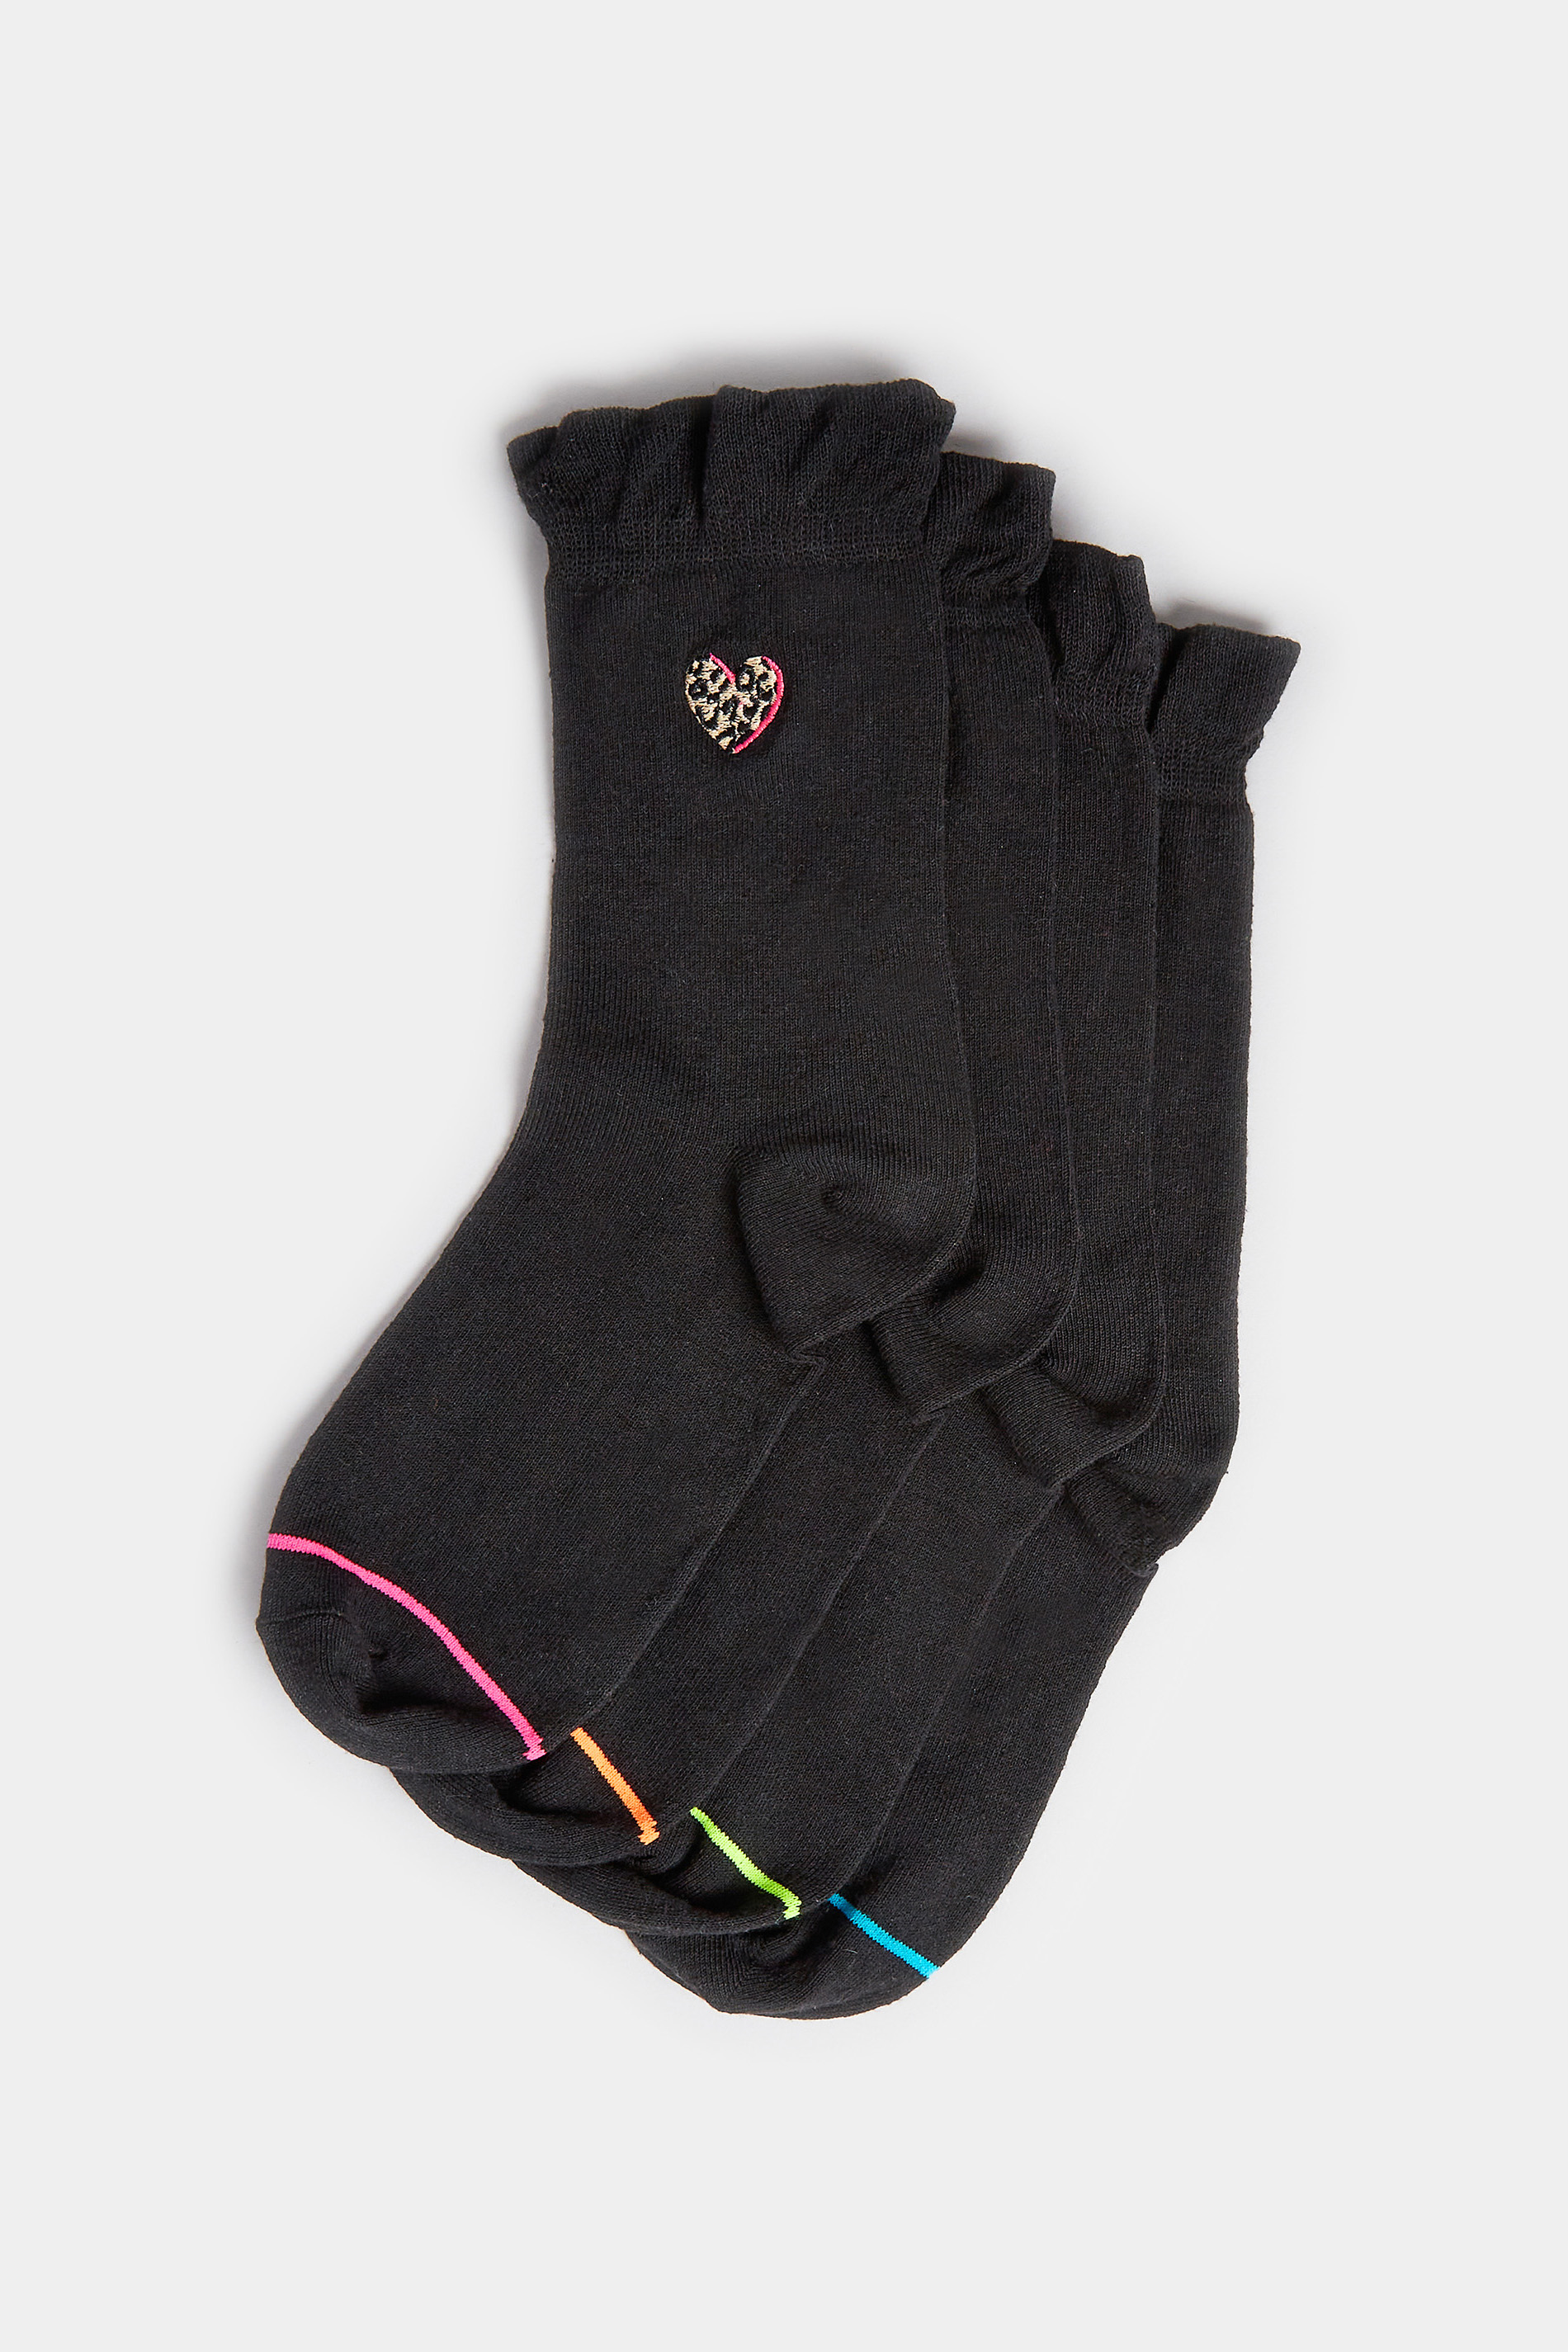 YOURS 4 PACK Black Embroidered Hearts Ankle Socks | Yours Clothing 3